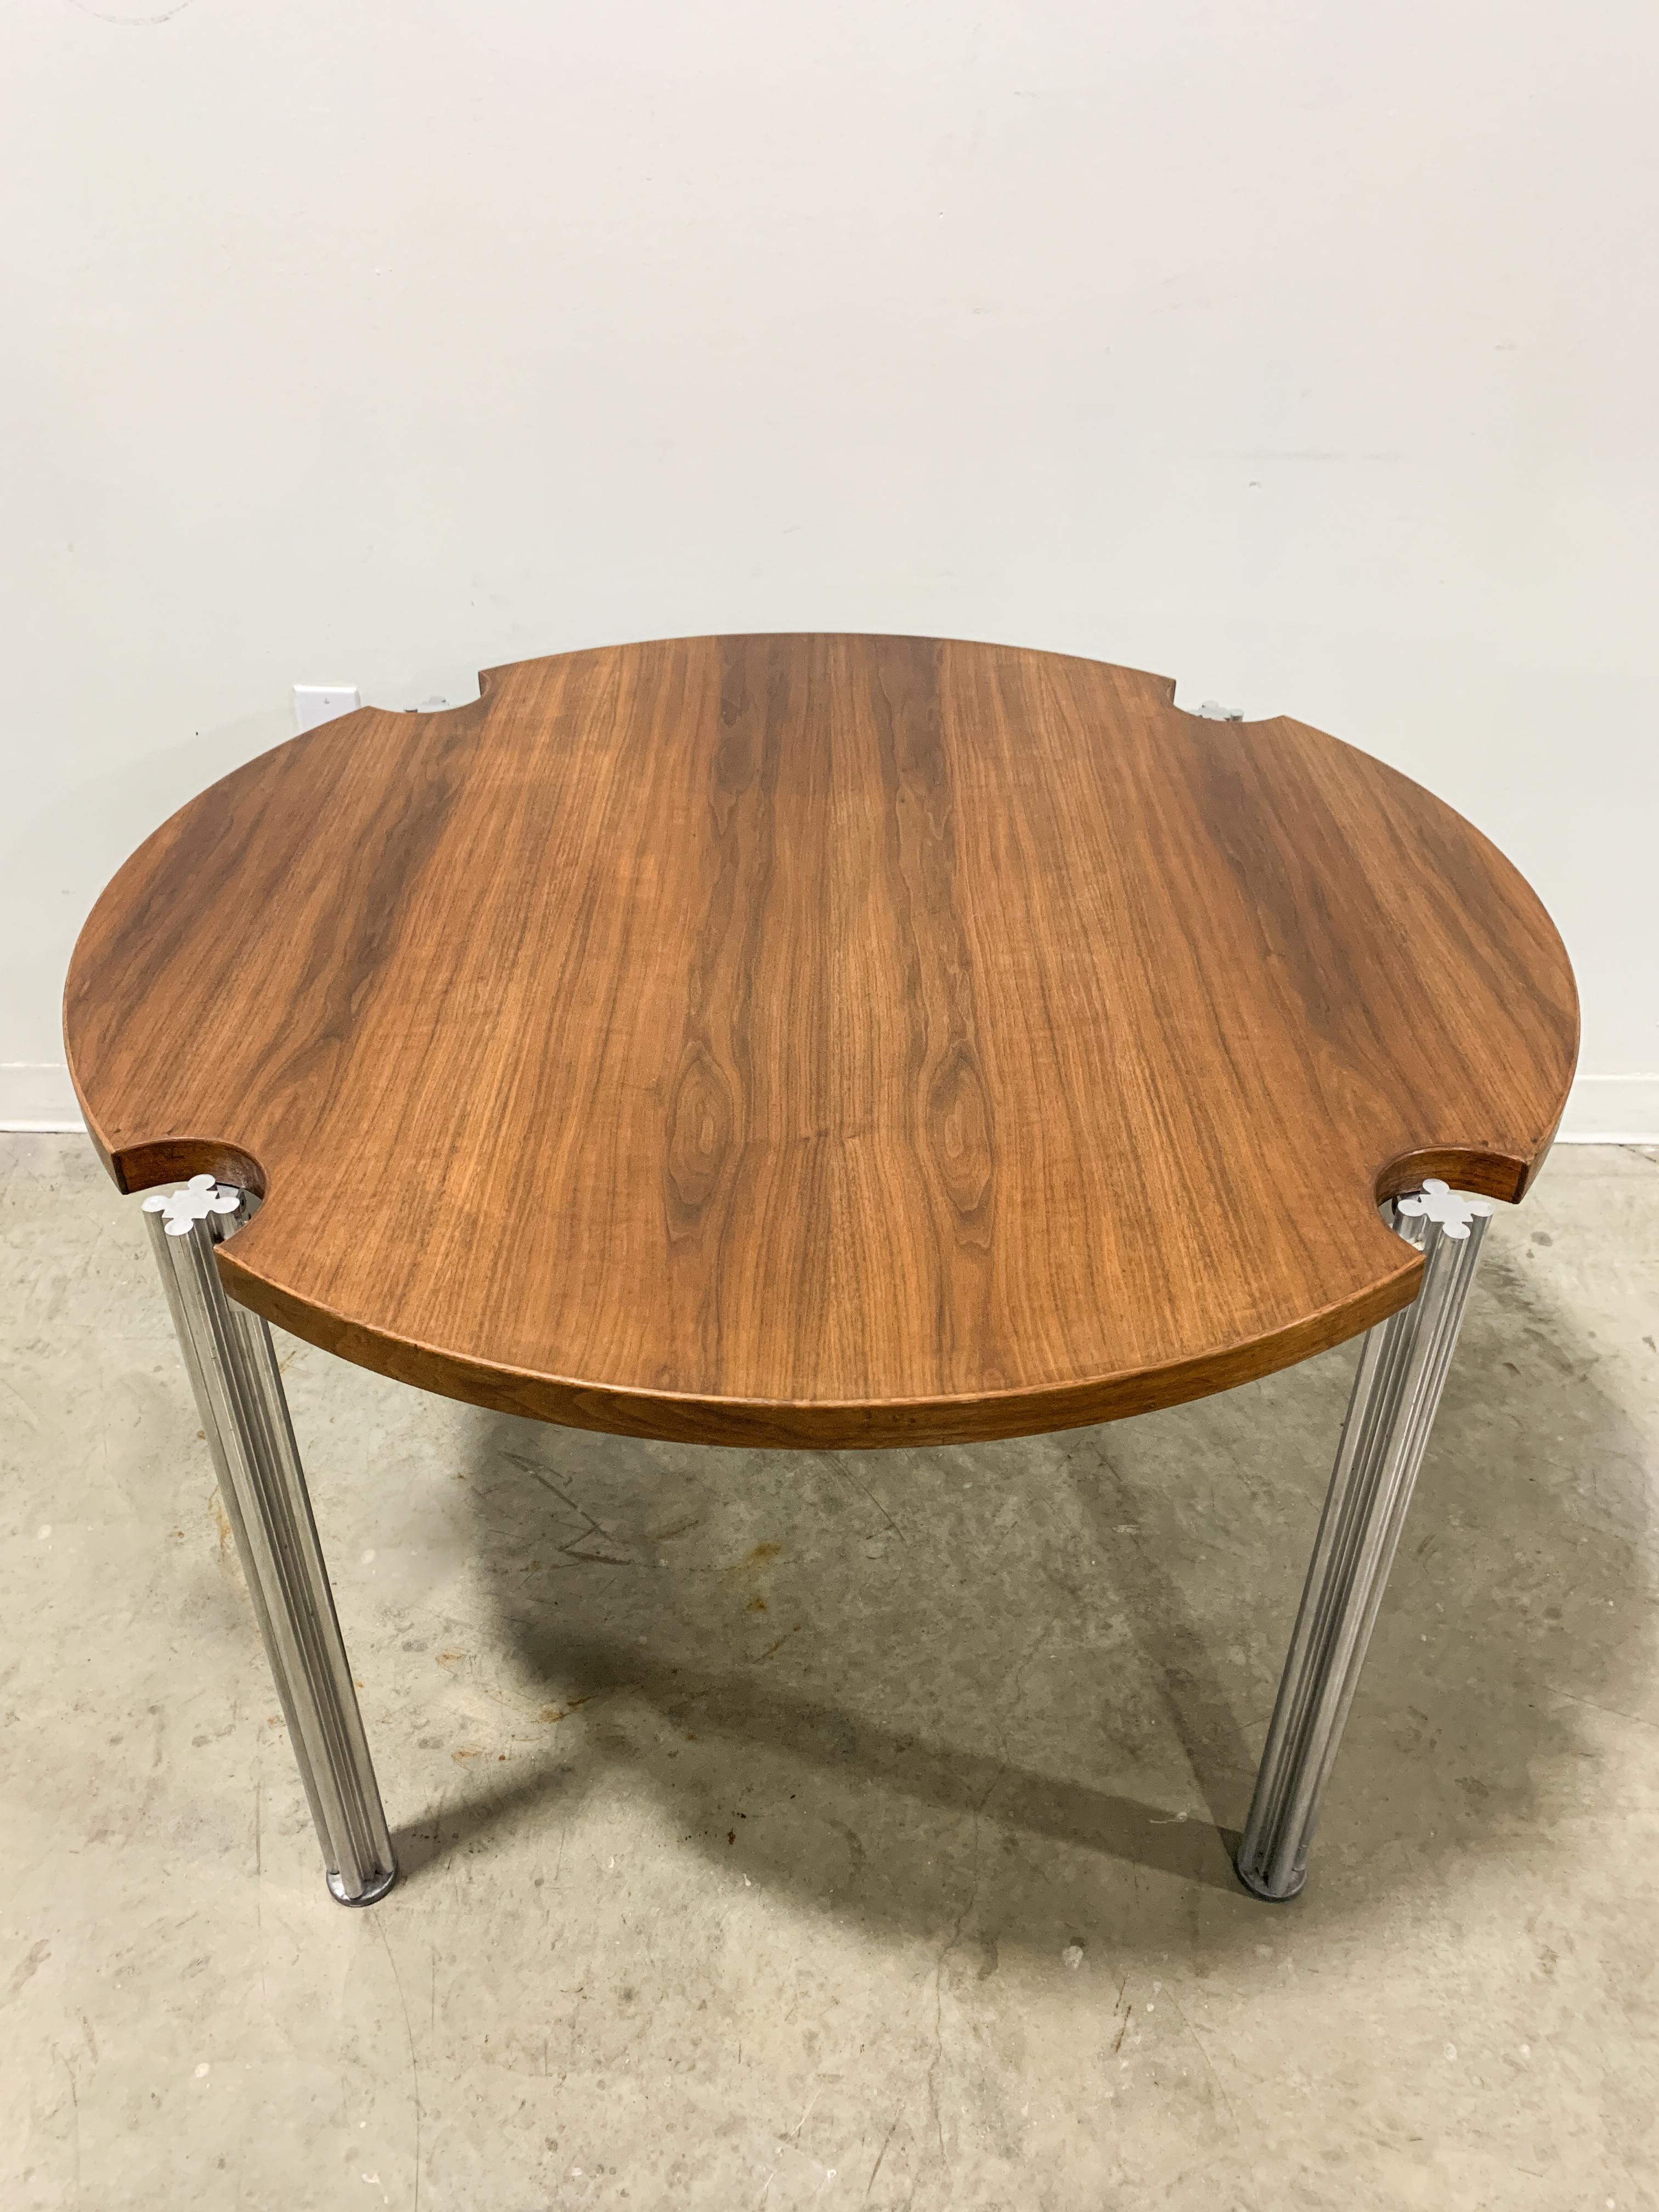 Designed in 1972 by George Ciancimino and distributed in the USA by Jens Risom, this rare and unique dining table makes us of Ciancimino's distinctive solid extruded aluminum cloverleaf column design. Connected with aluminum stretchers and fastened